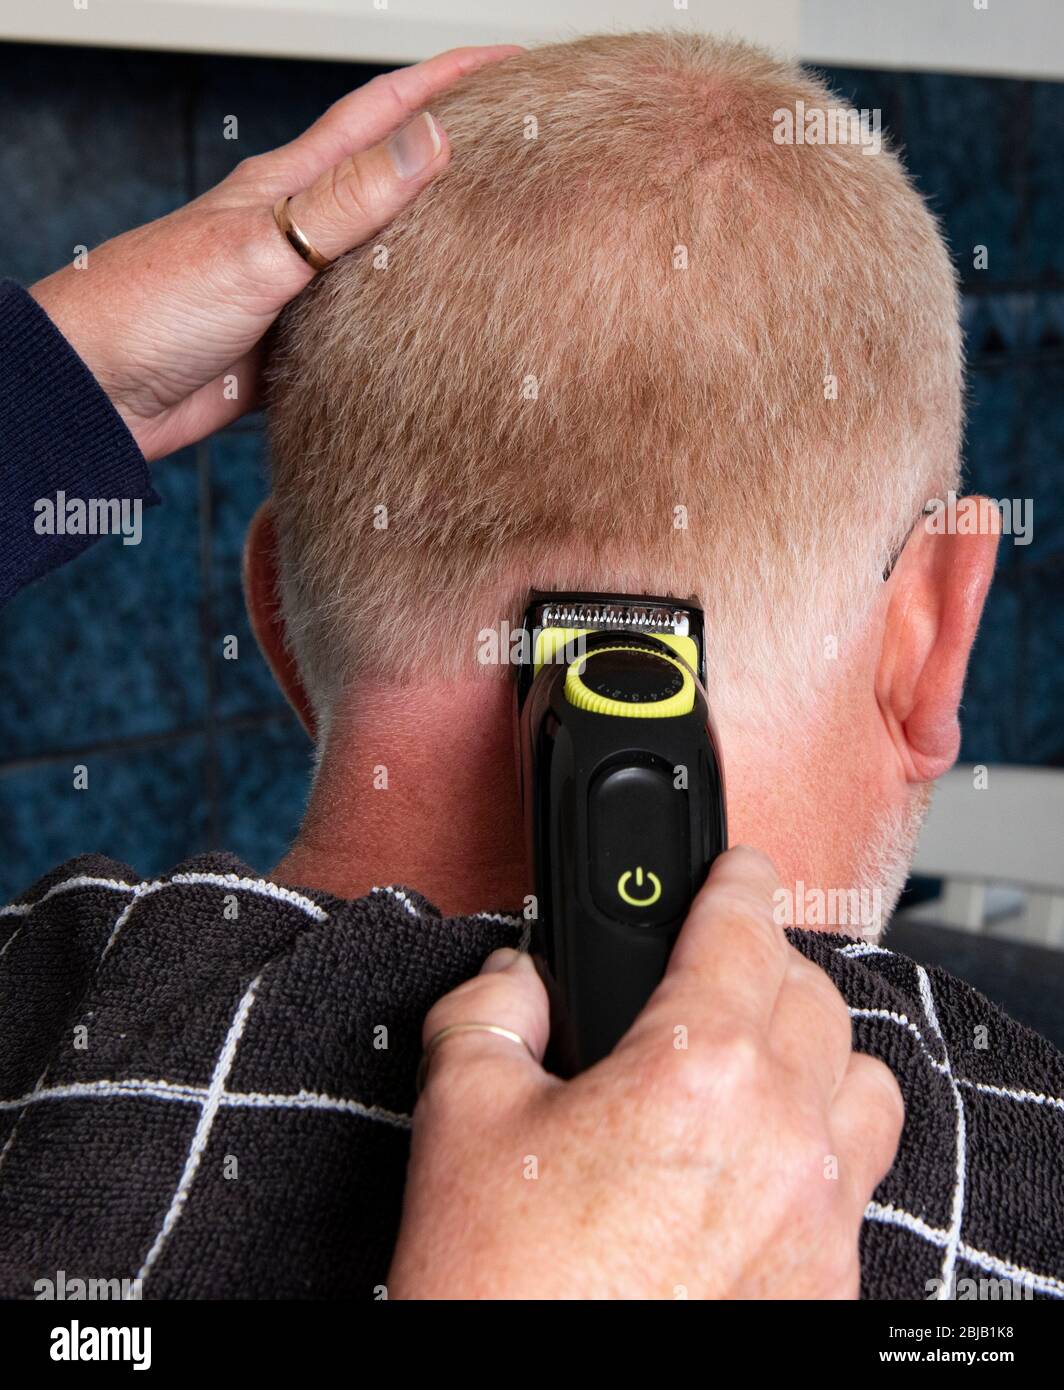 Hair trimmers being used at home to trim hair Stock Photo